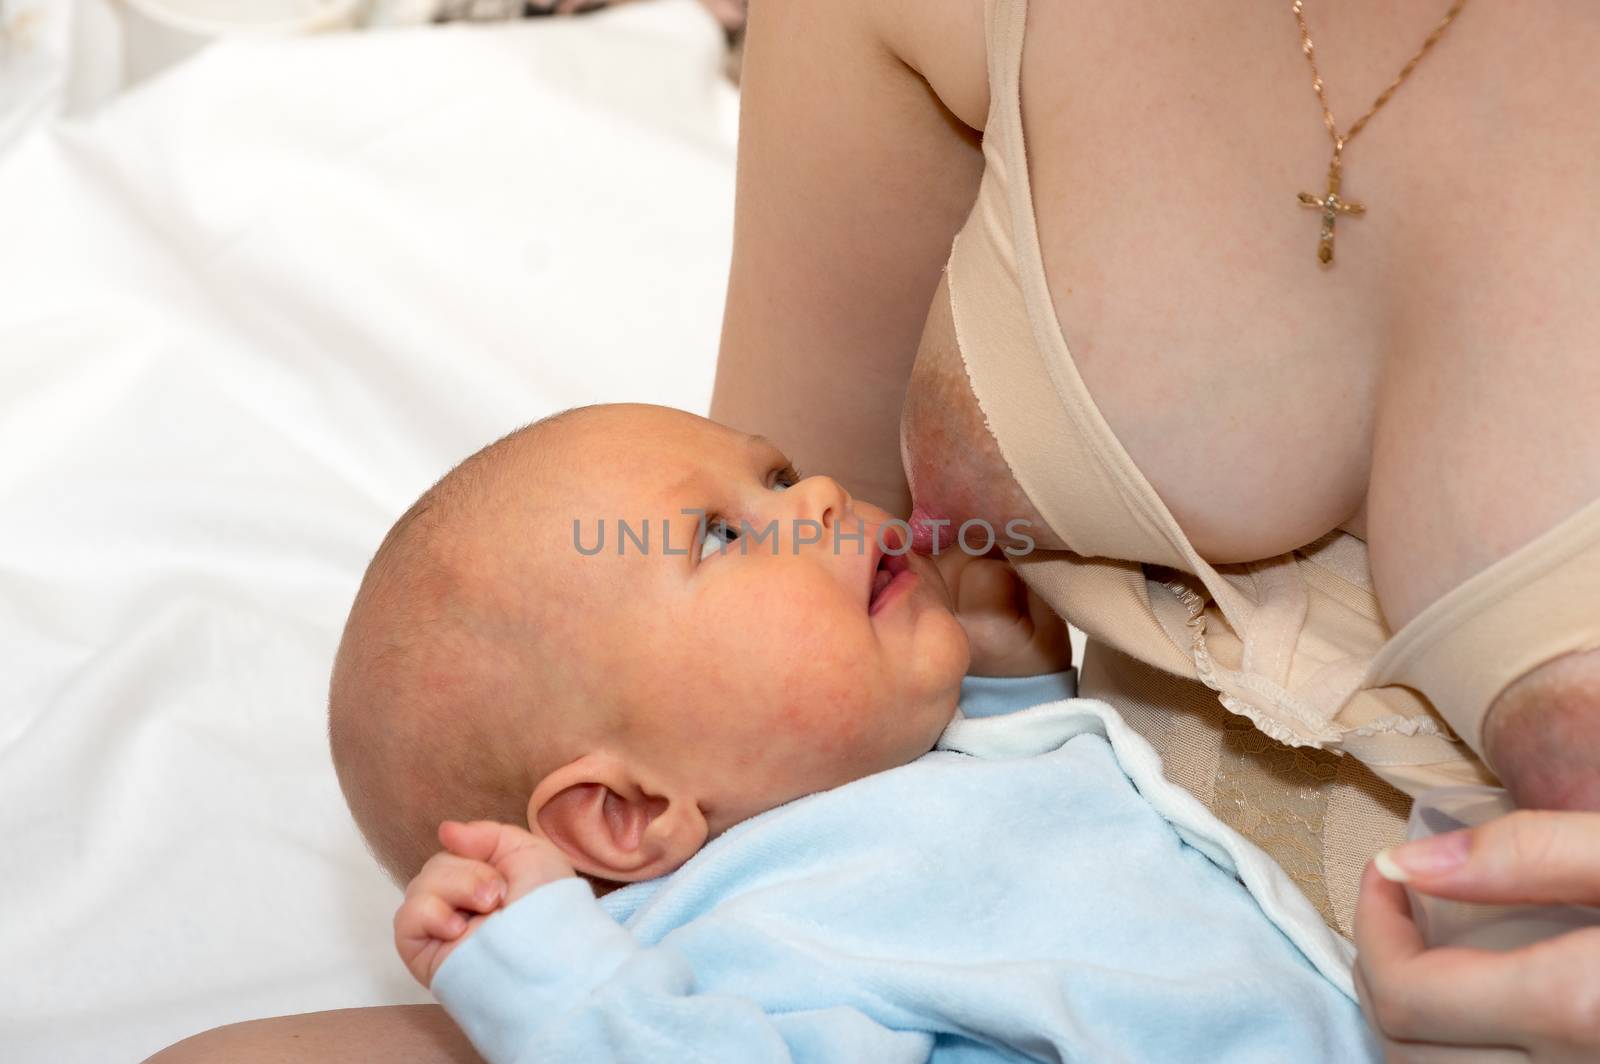 Mother breastfeeds the baby close up shot